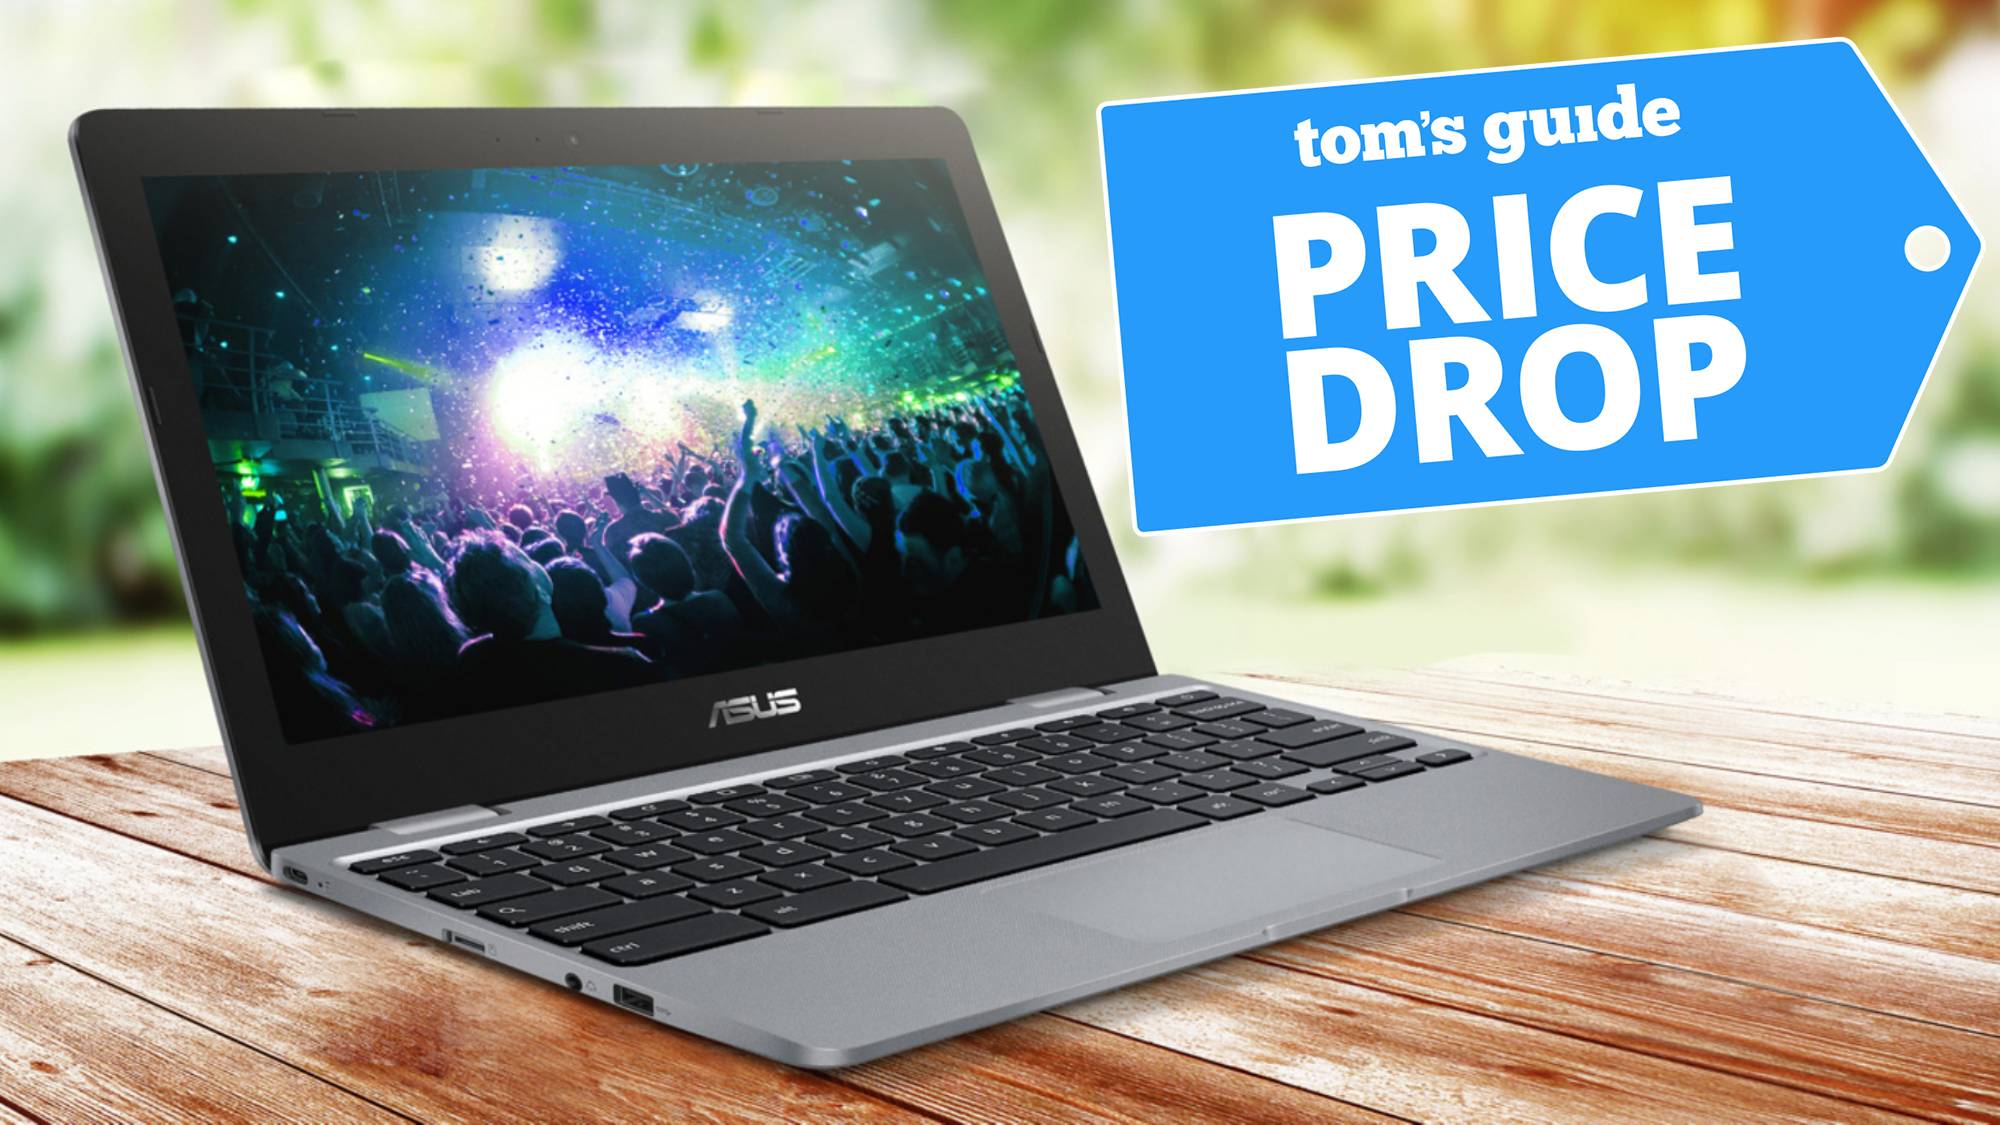 Asus C423 Chromebook with a Tom's Guide offer tag